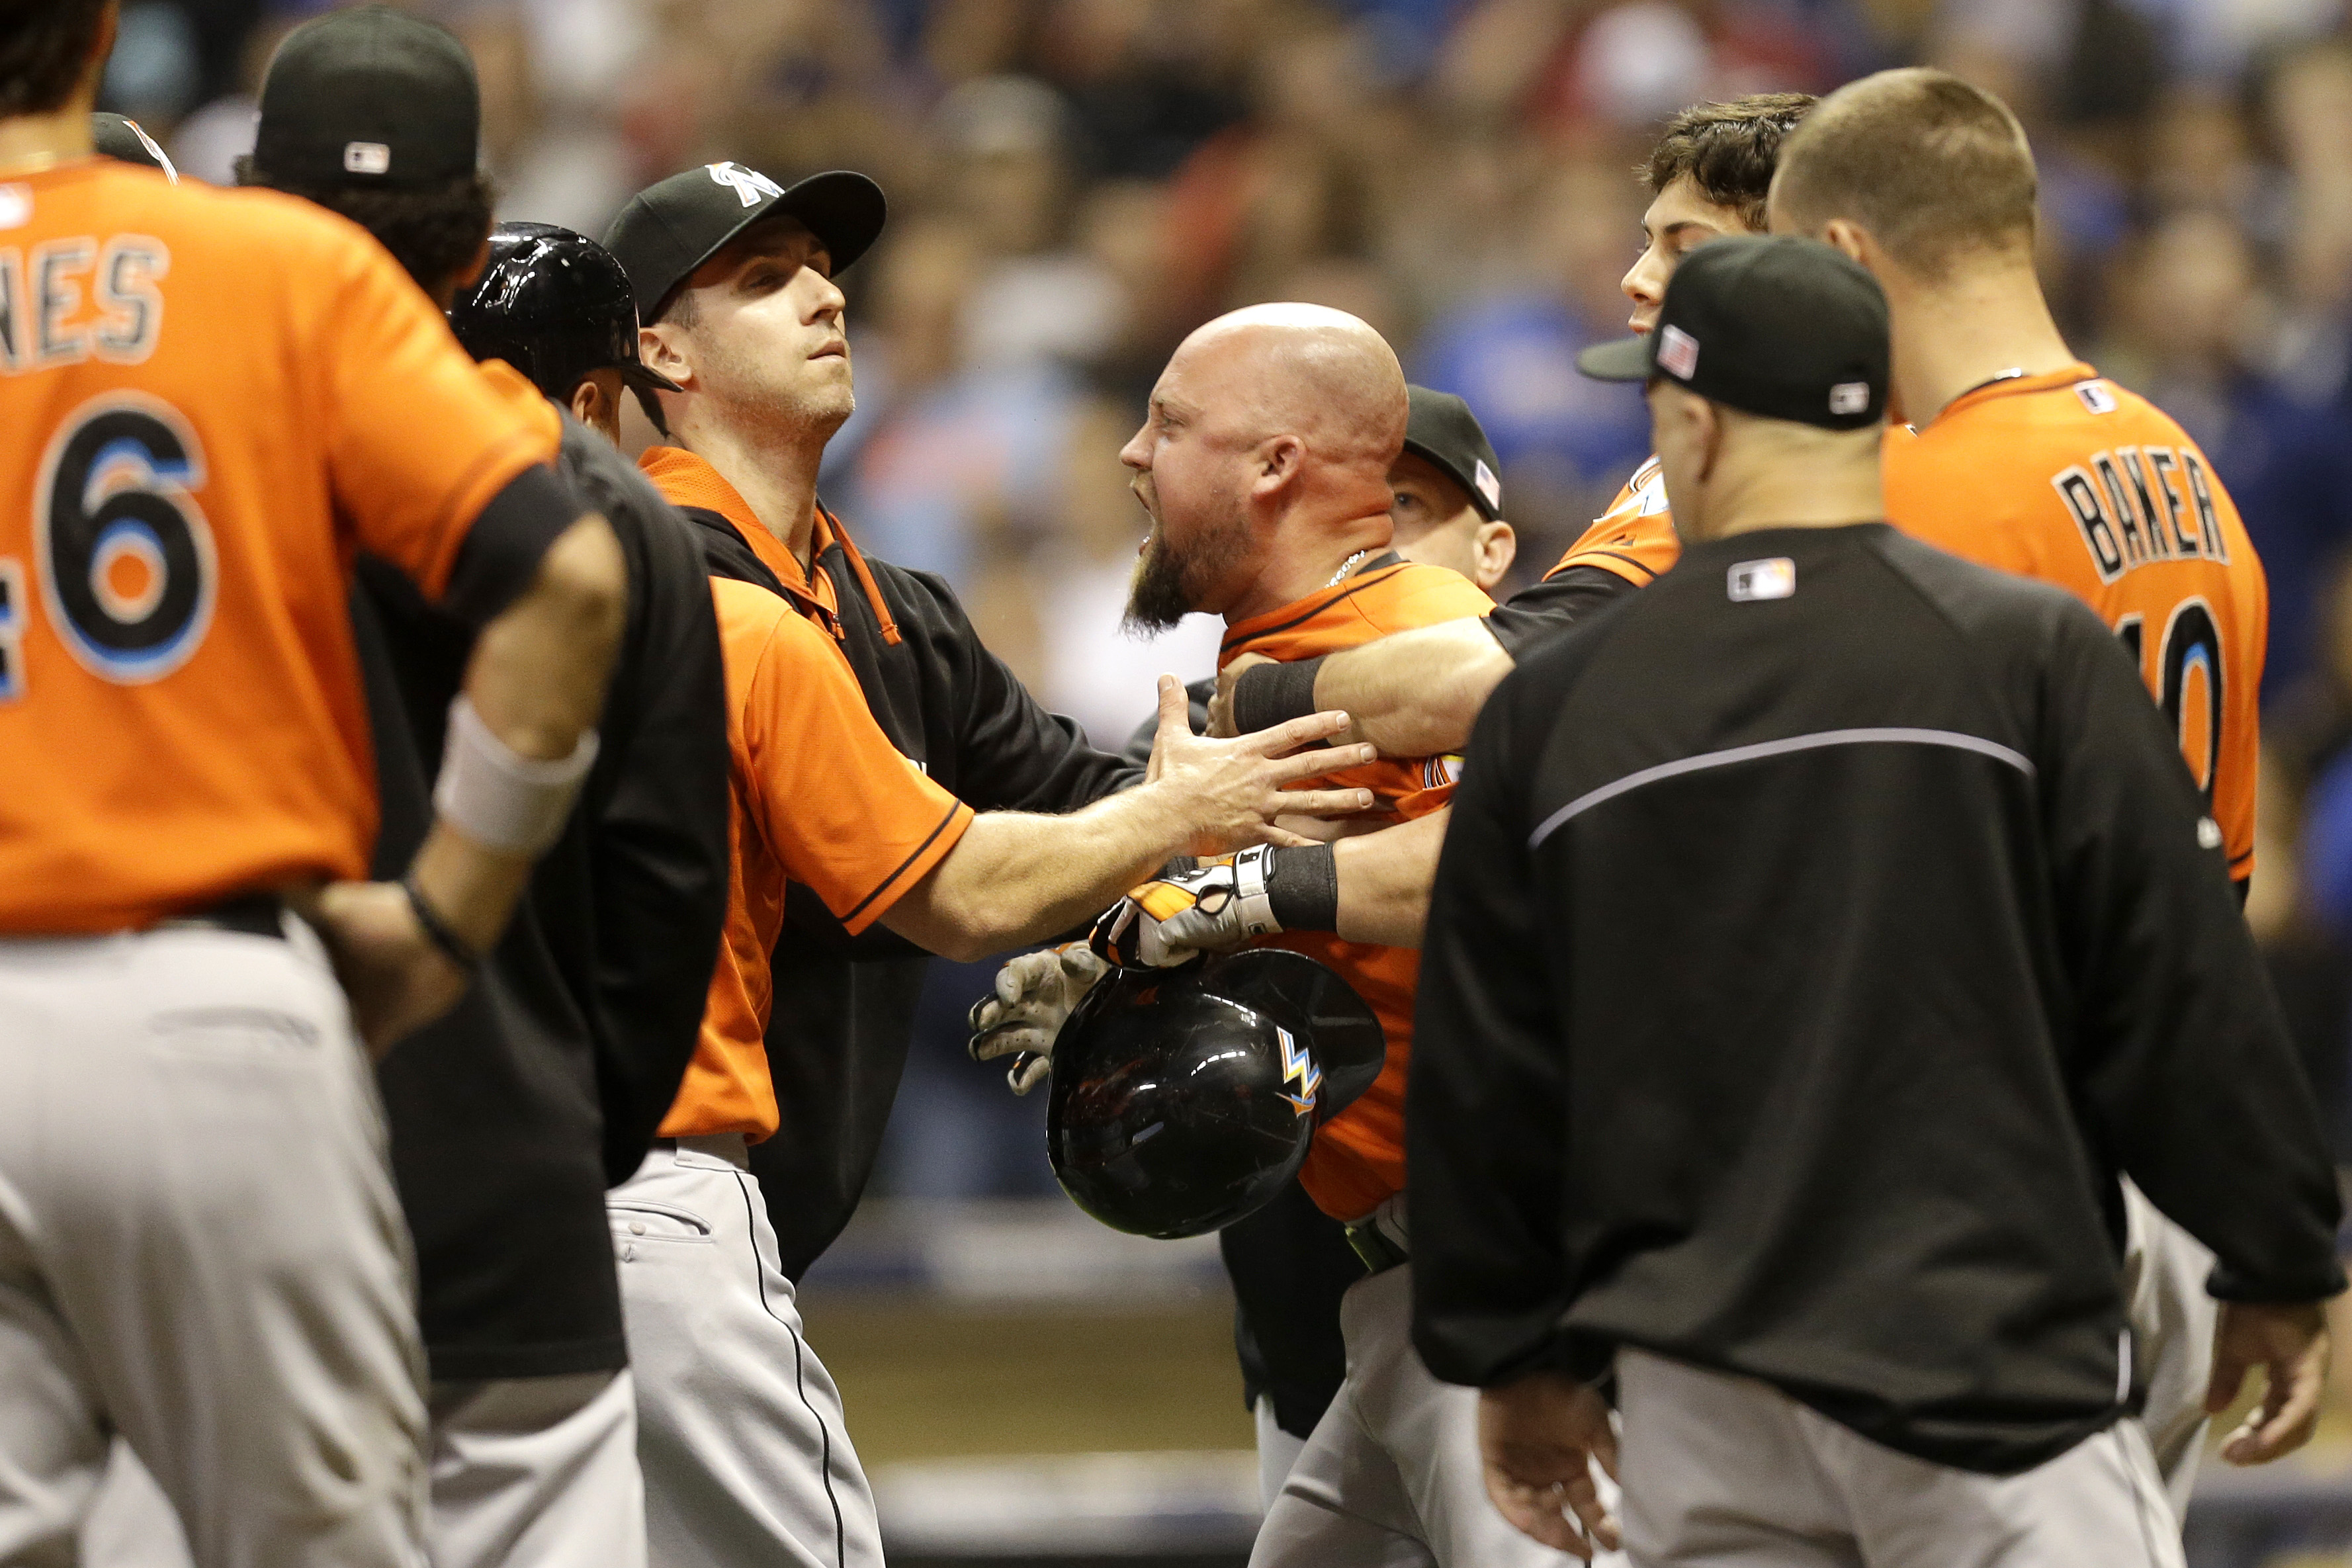 MILWAUKEE, WI - SEPTEMBER 11: Casey McGehee #9 of the Miami Marlins yells at Mike Fiers of the Milwaukee Brewers at Miller Park on September 11, 2014 in Milwaukee, Wisconsin. (Photo by Mike McGinnis/Getty Images)